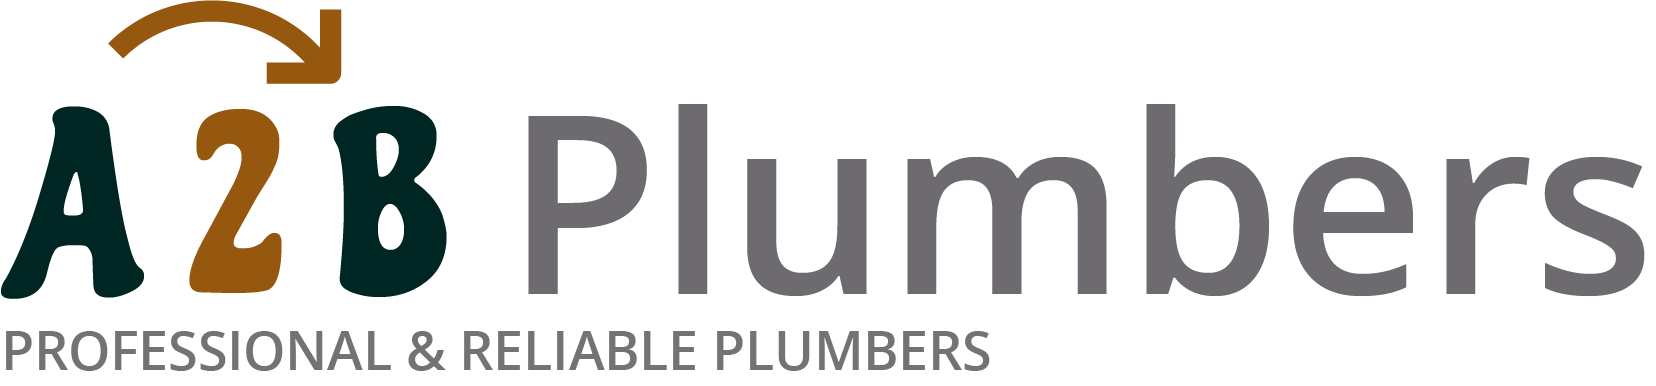 If you need a boiler installed, a radiator repaired or a leaking tap fixed, call us now - we provide services for properties in Runcorn and the local area.